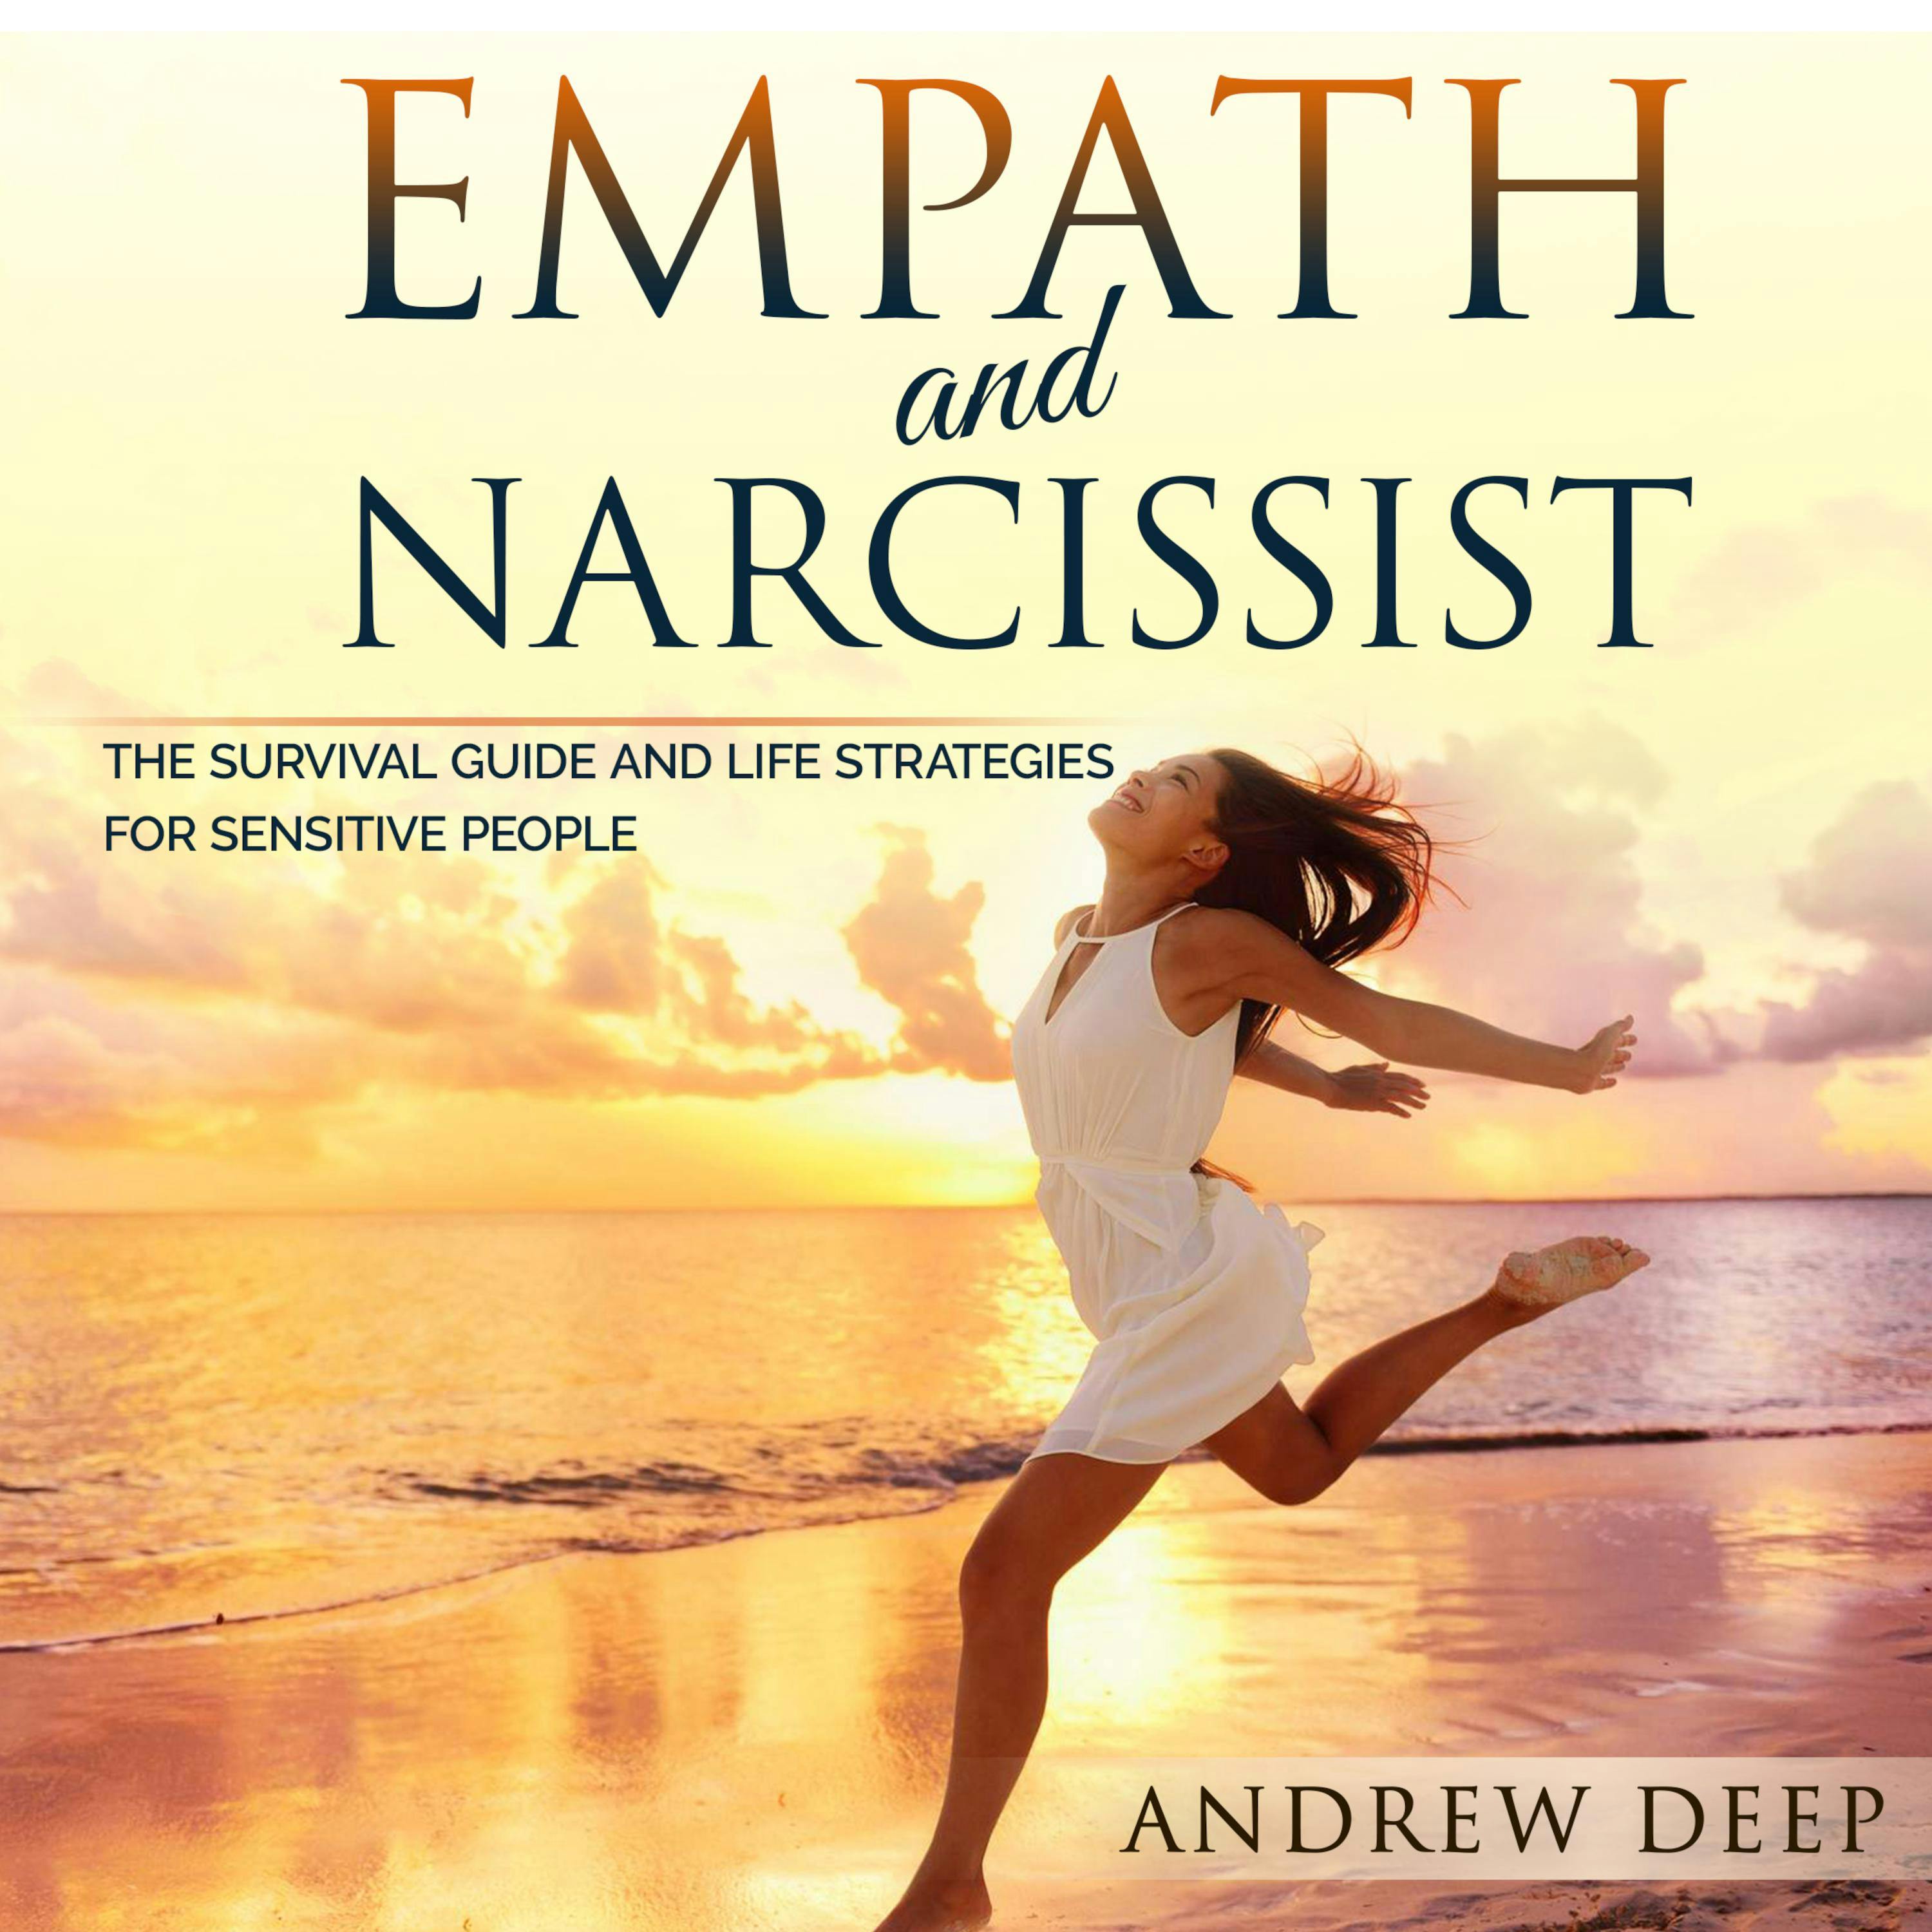 Empath and Narcissist: The Survival Guide and Life Strategies for Sensitive People - Andrew Deep